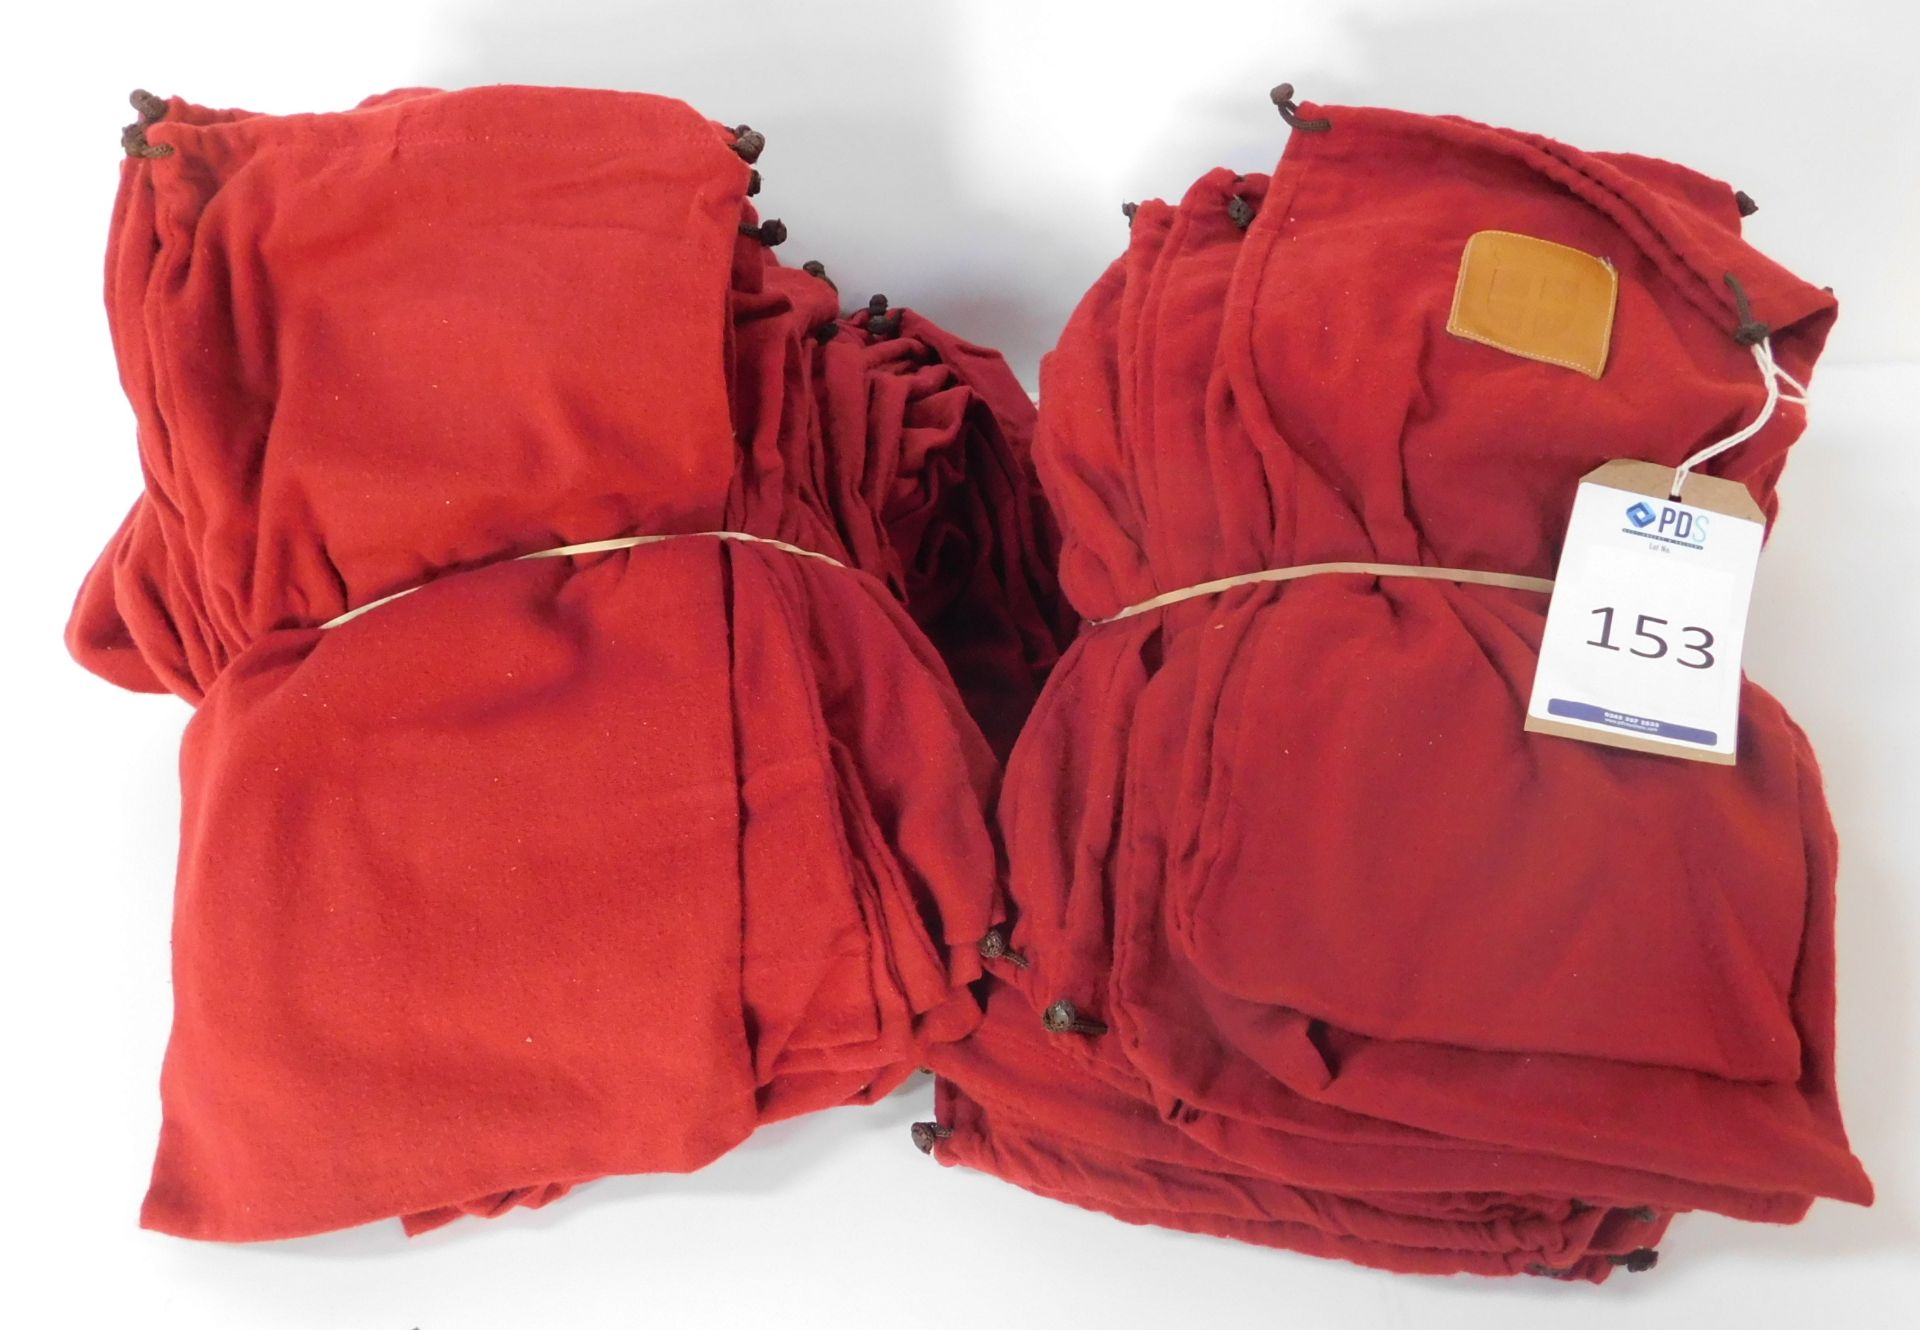 92 Alfred Sargent Red Shoe Bags (Location: Brentwood - See General Notes for Details)